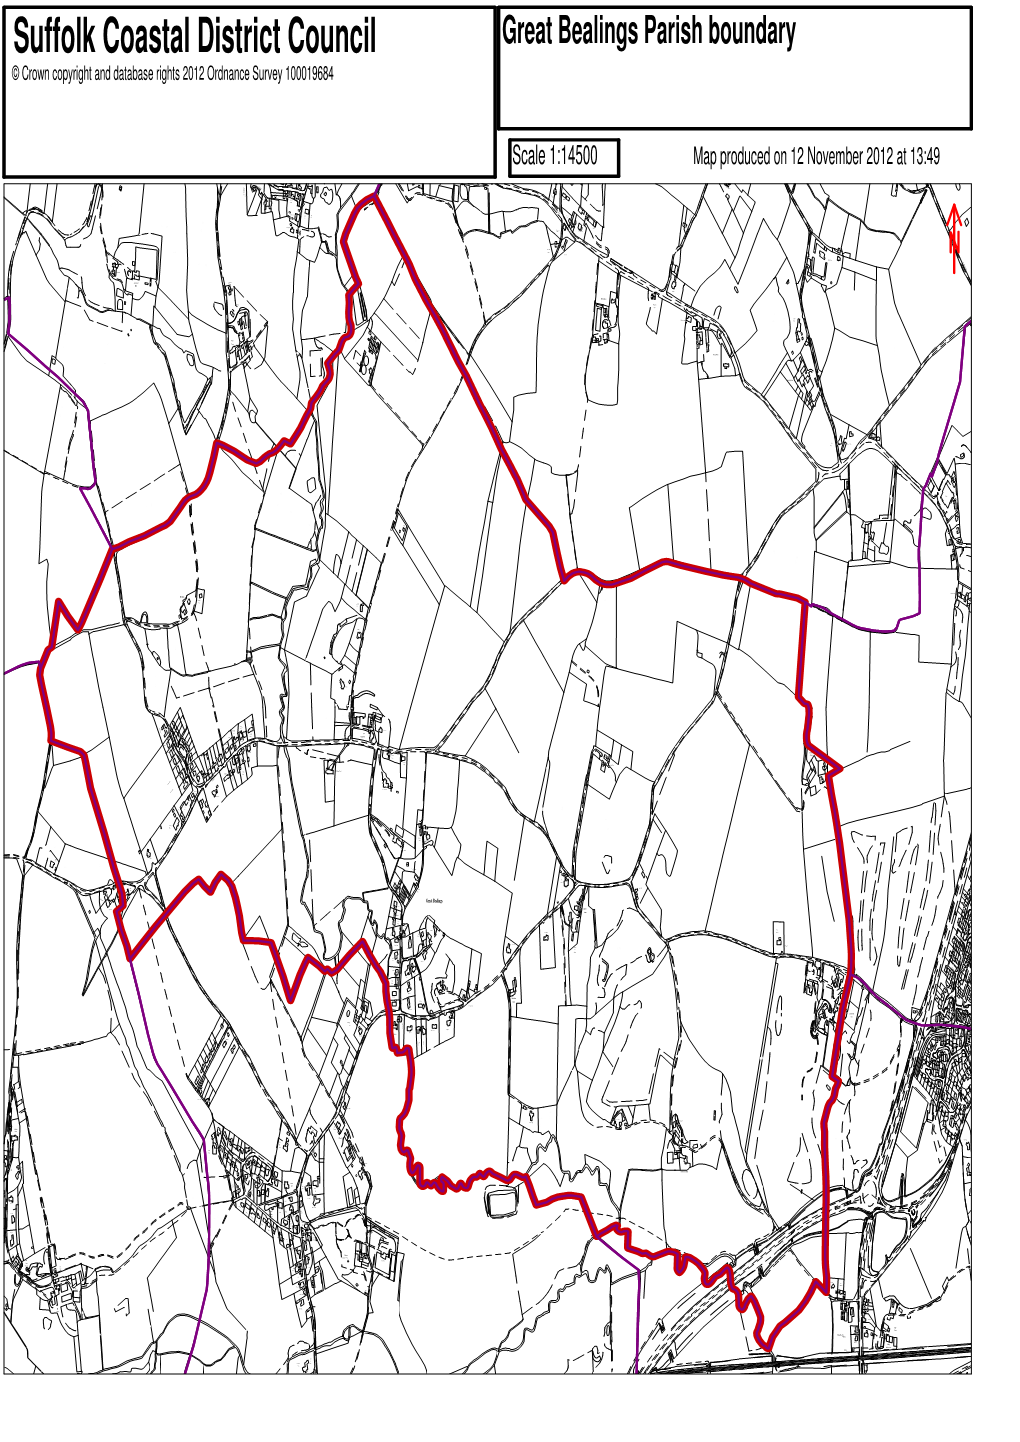 Suffolk Coastal District Council Great Bealings Parish Boundary © Crown Copyright and Database Rights 2012 Ordnance Survey 100019684